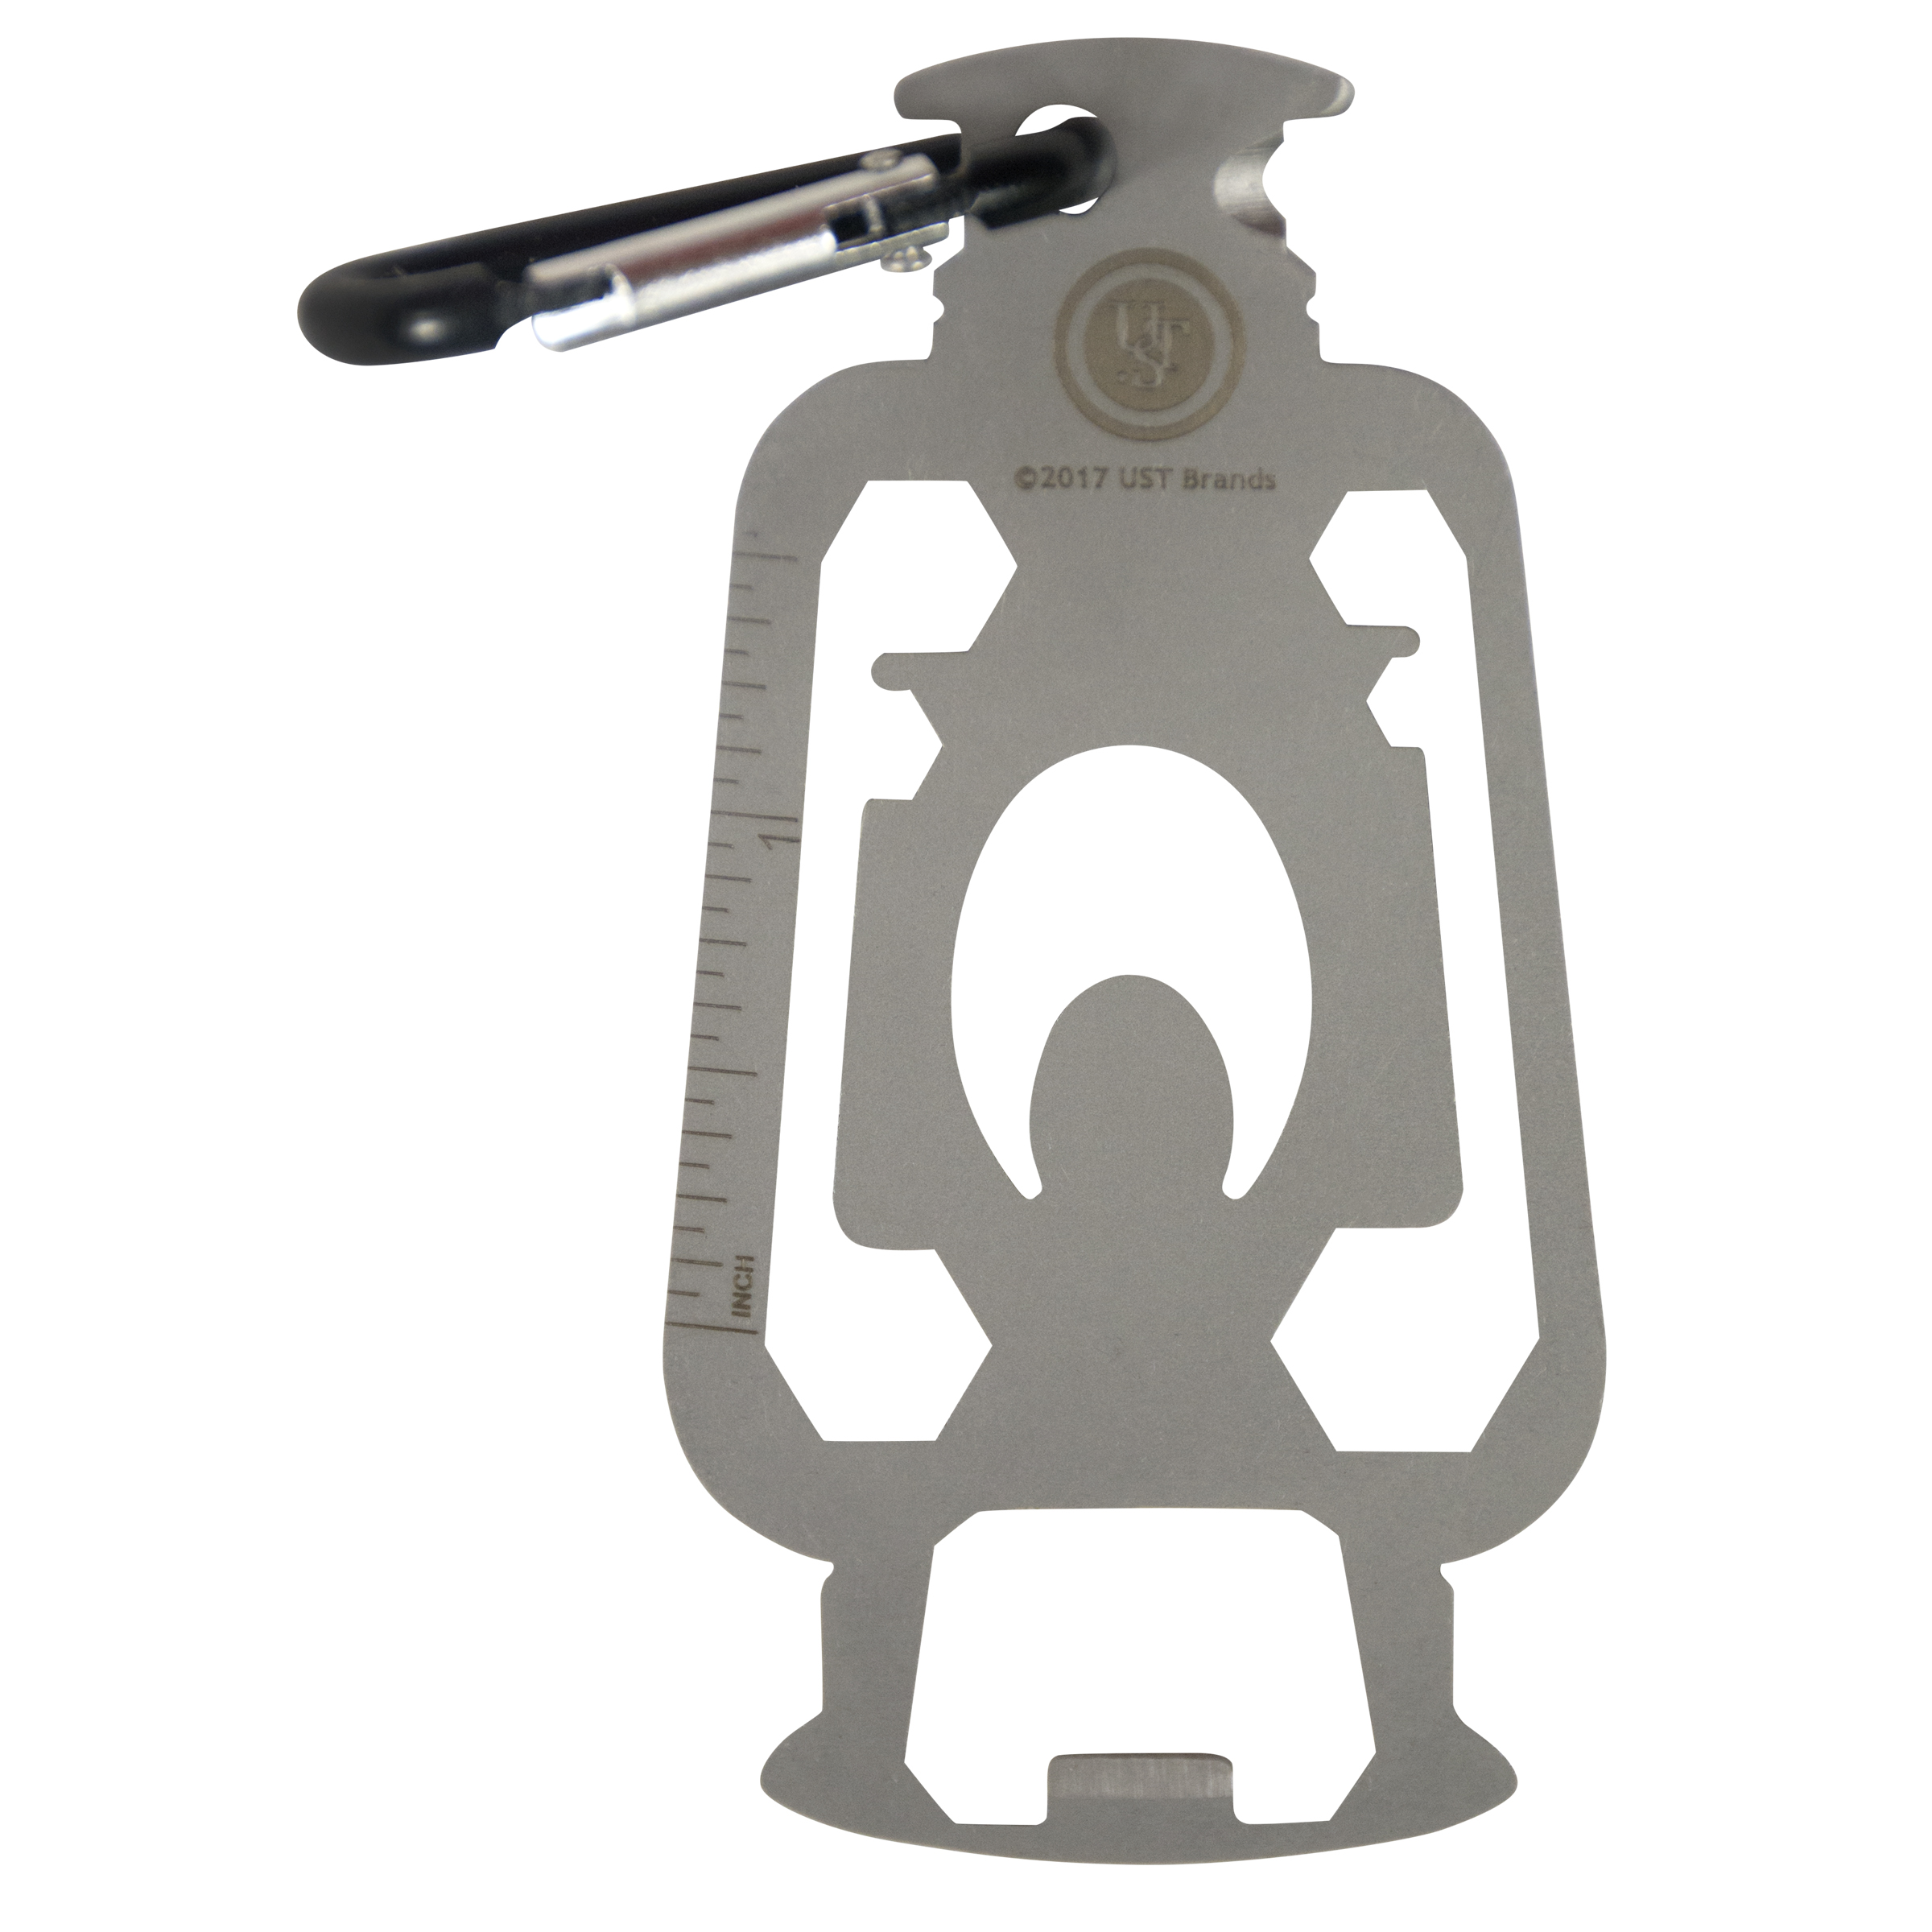 UST Tool A Long  Lantern Durable Stainless Steel Accessible Multi-Tool 3.5” New